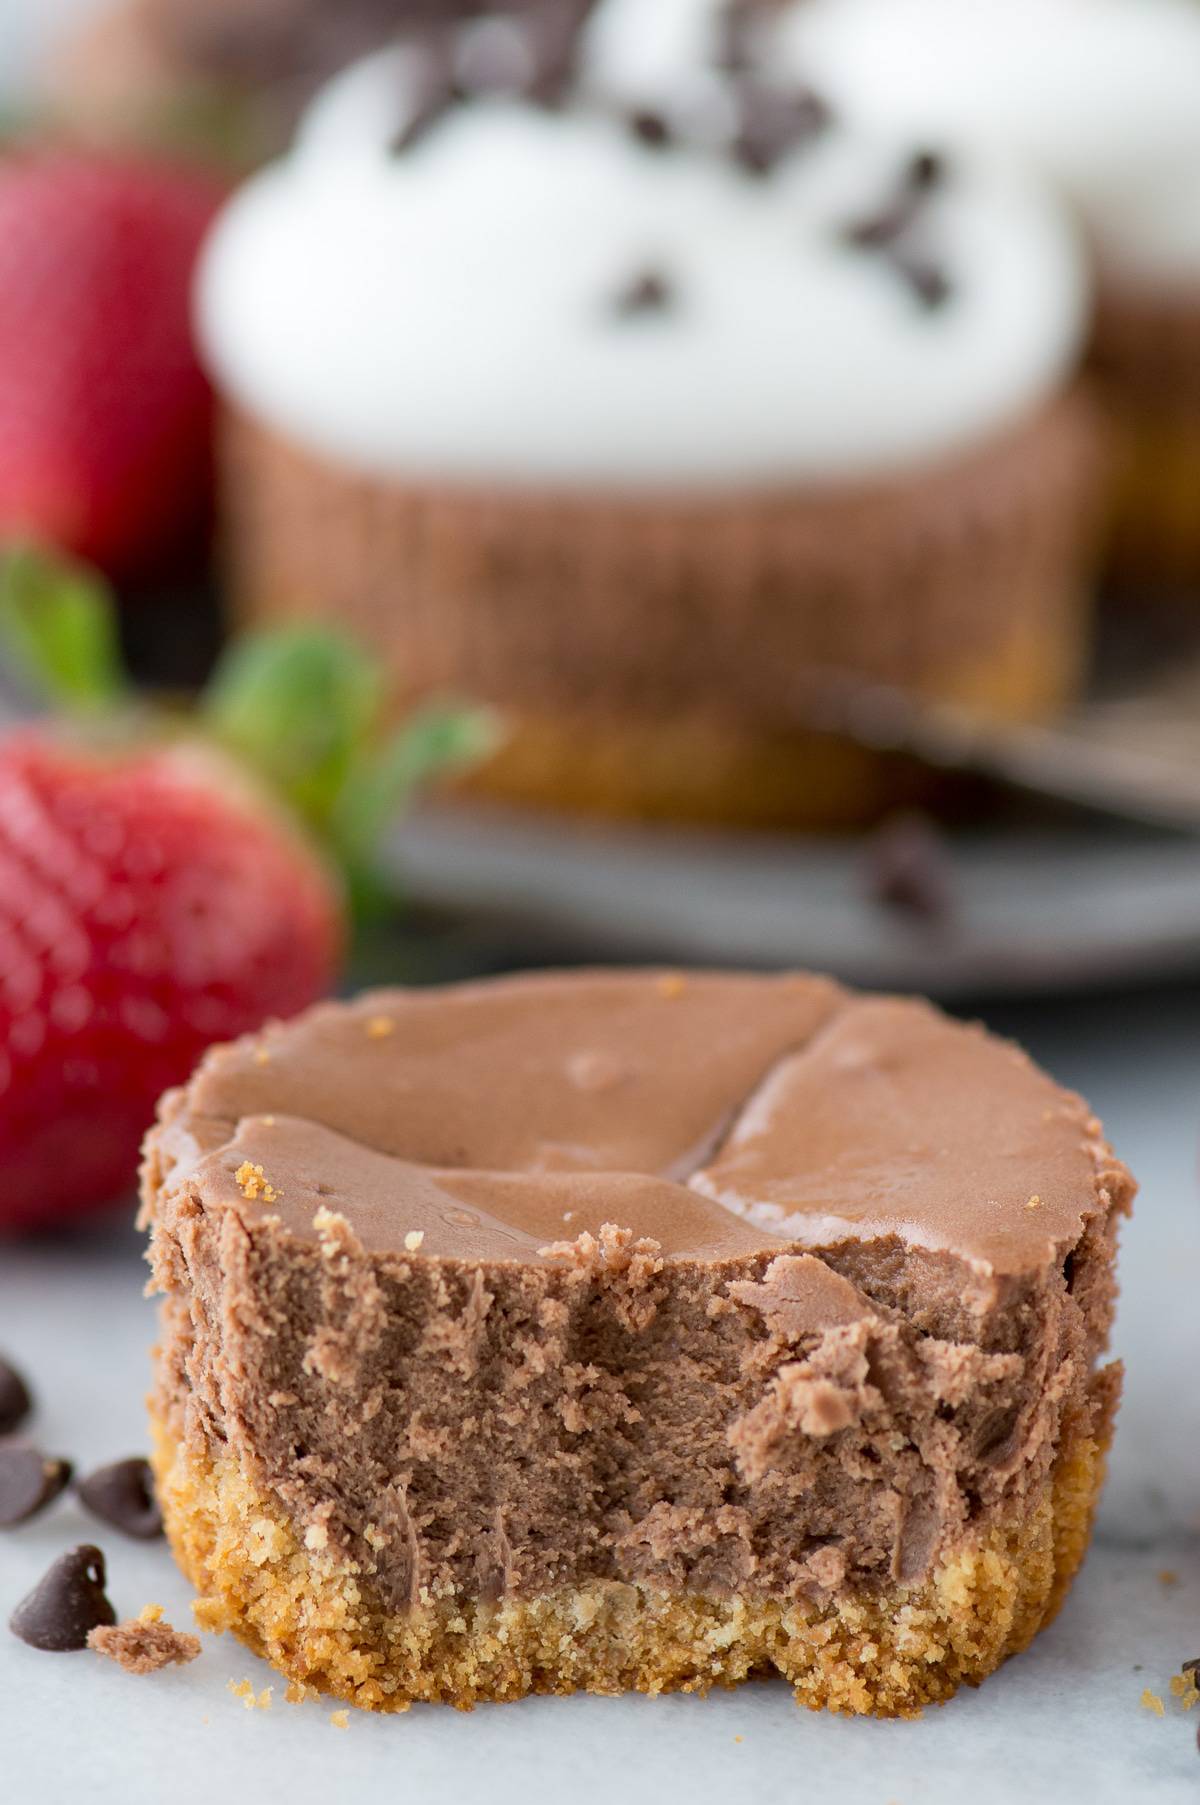 Mini Chocolate Cheesecakes | The First Year